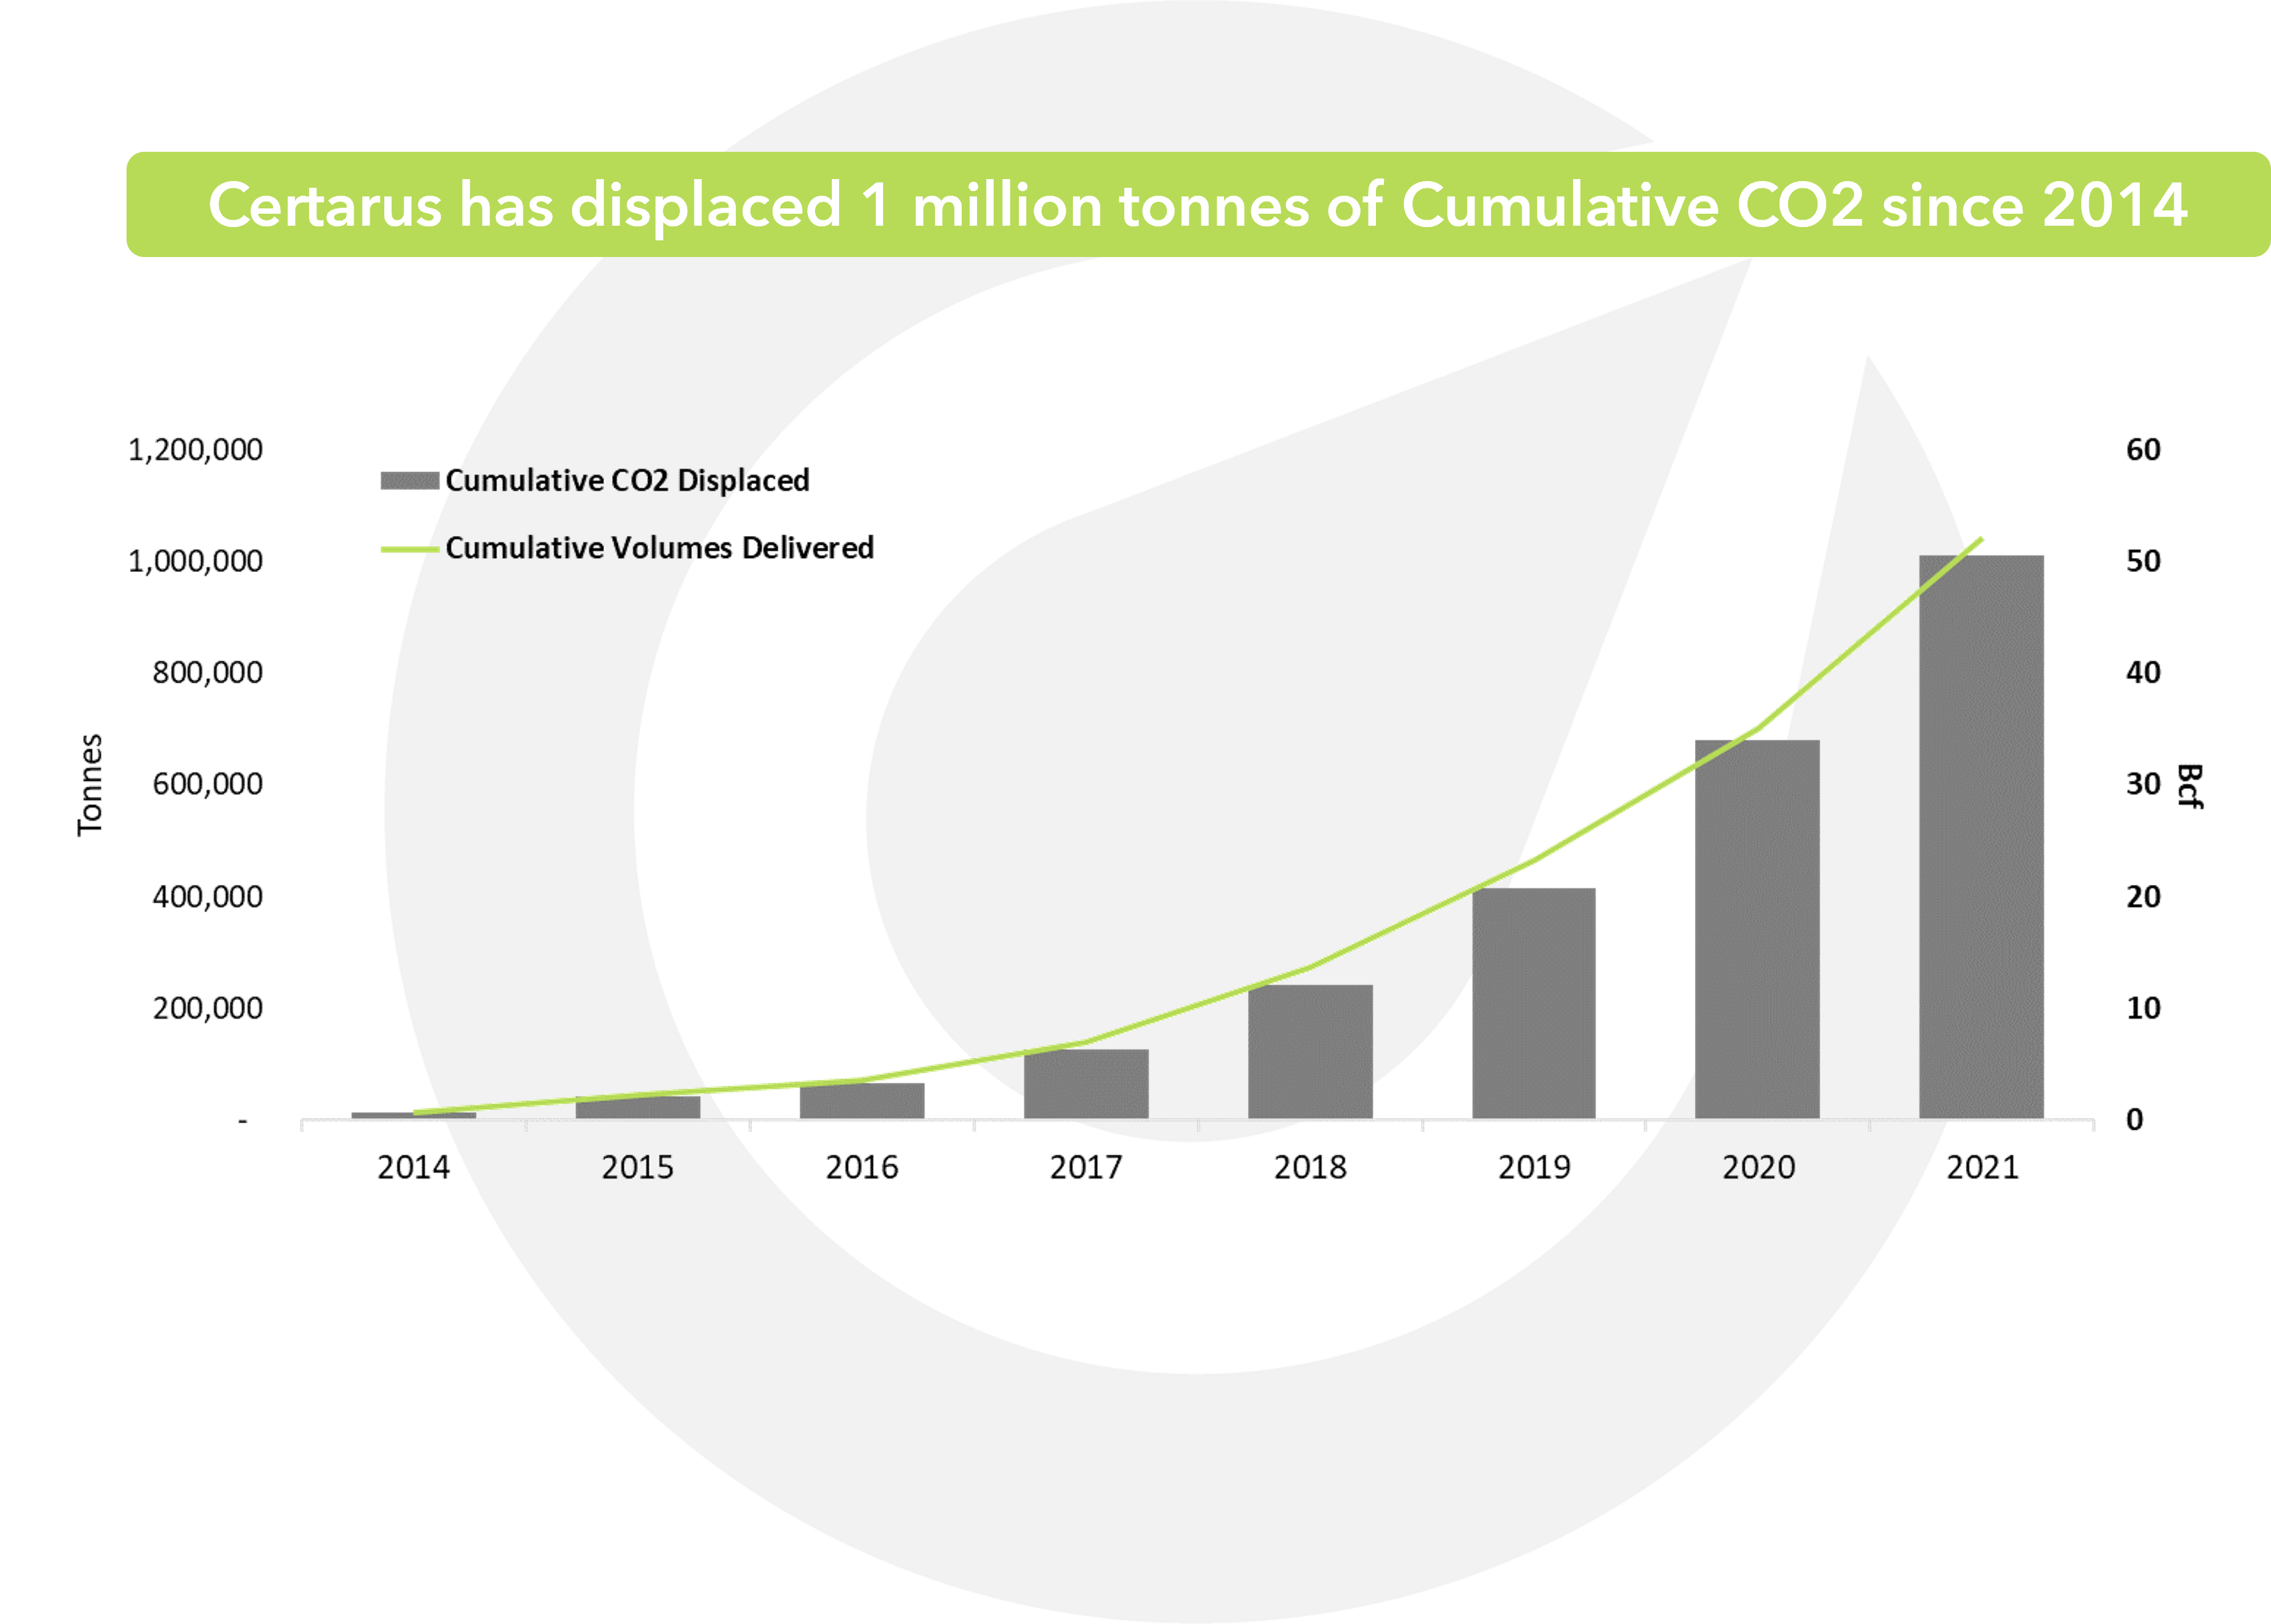 Certarus CO2 Displacement Since 2014